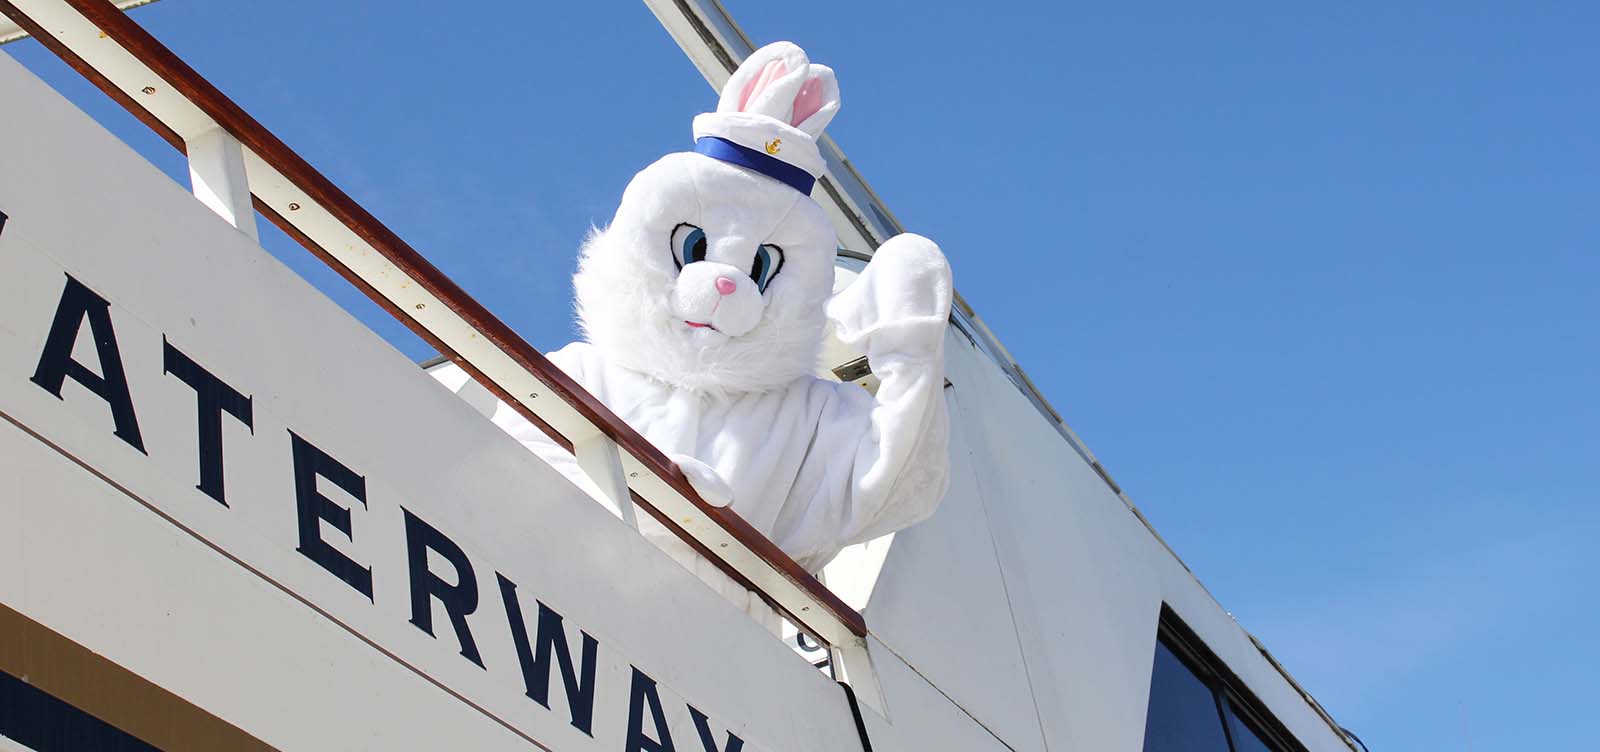 Easter bunny waving from a yacht.